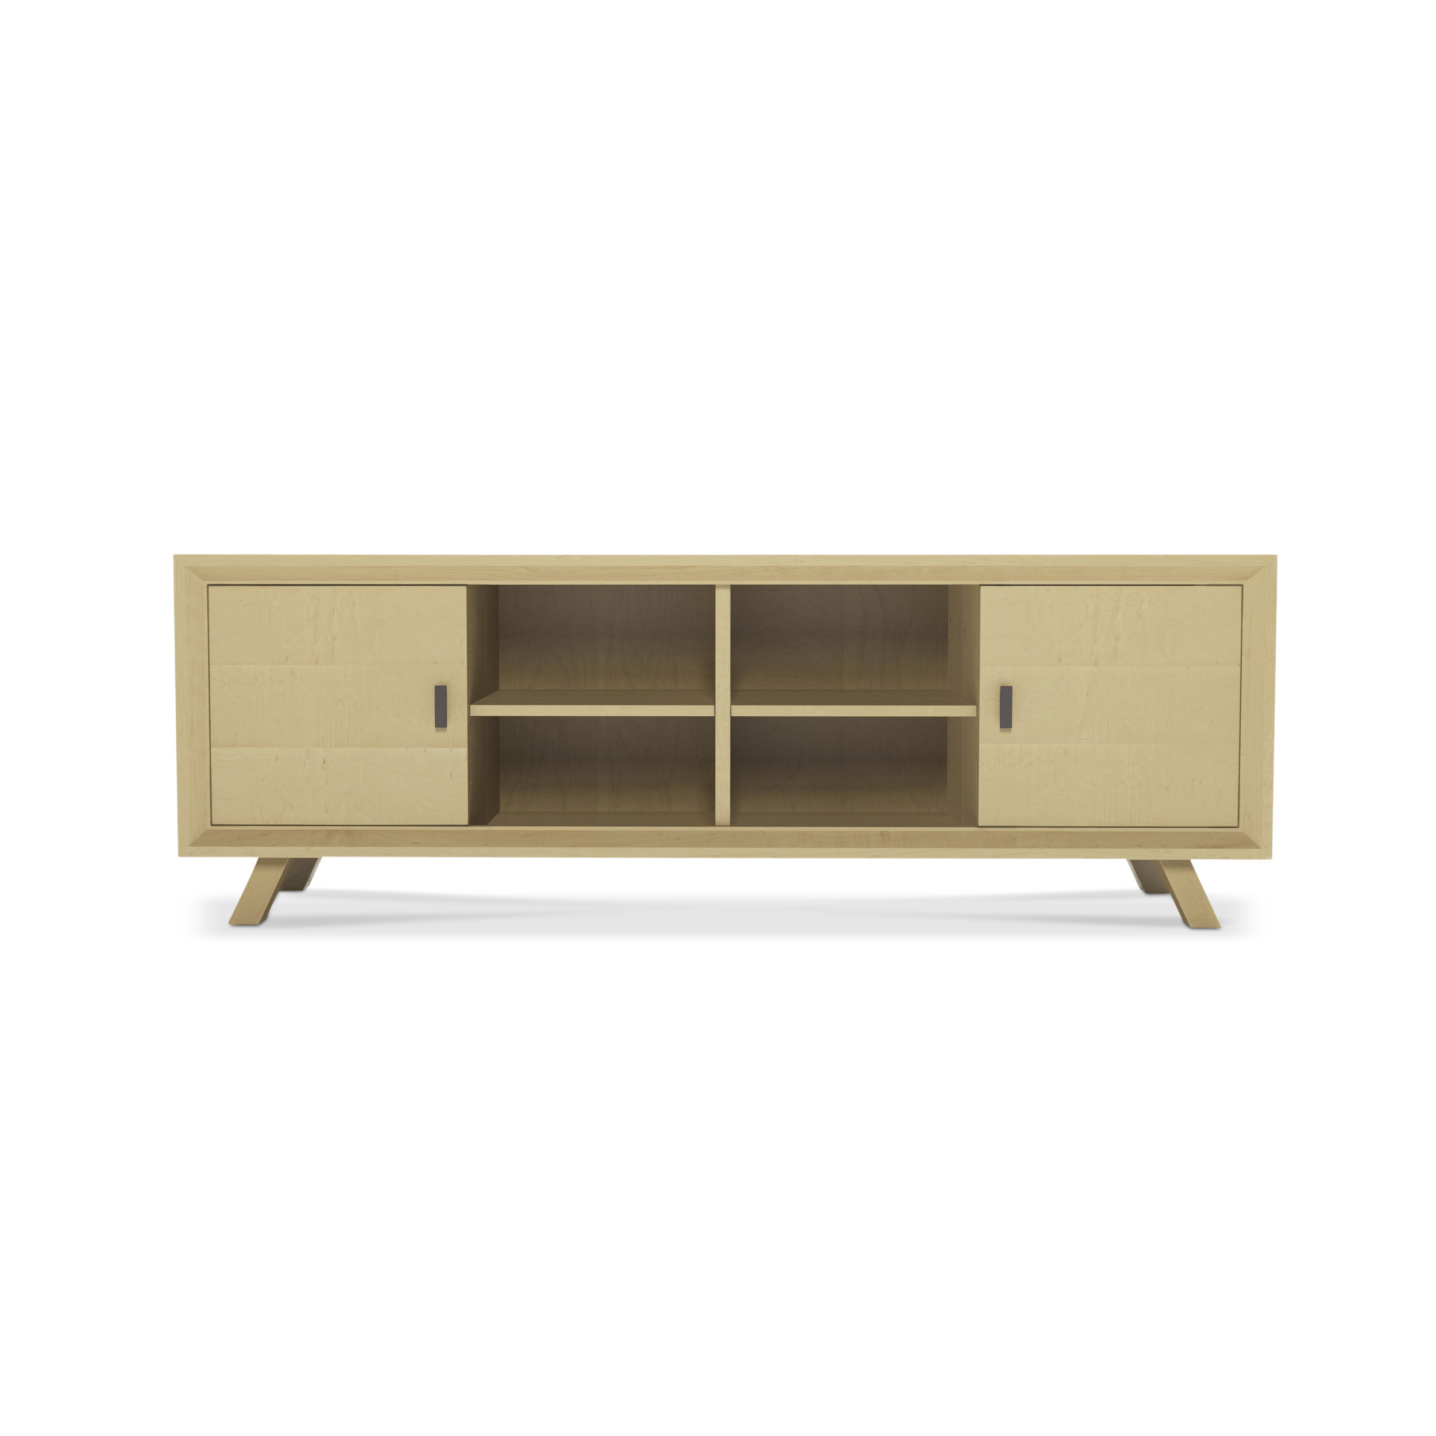 Nordic solid maple cabinet